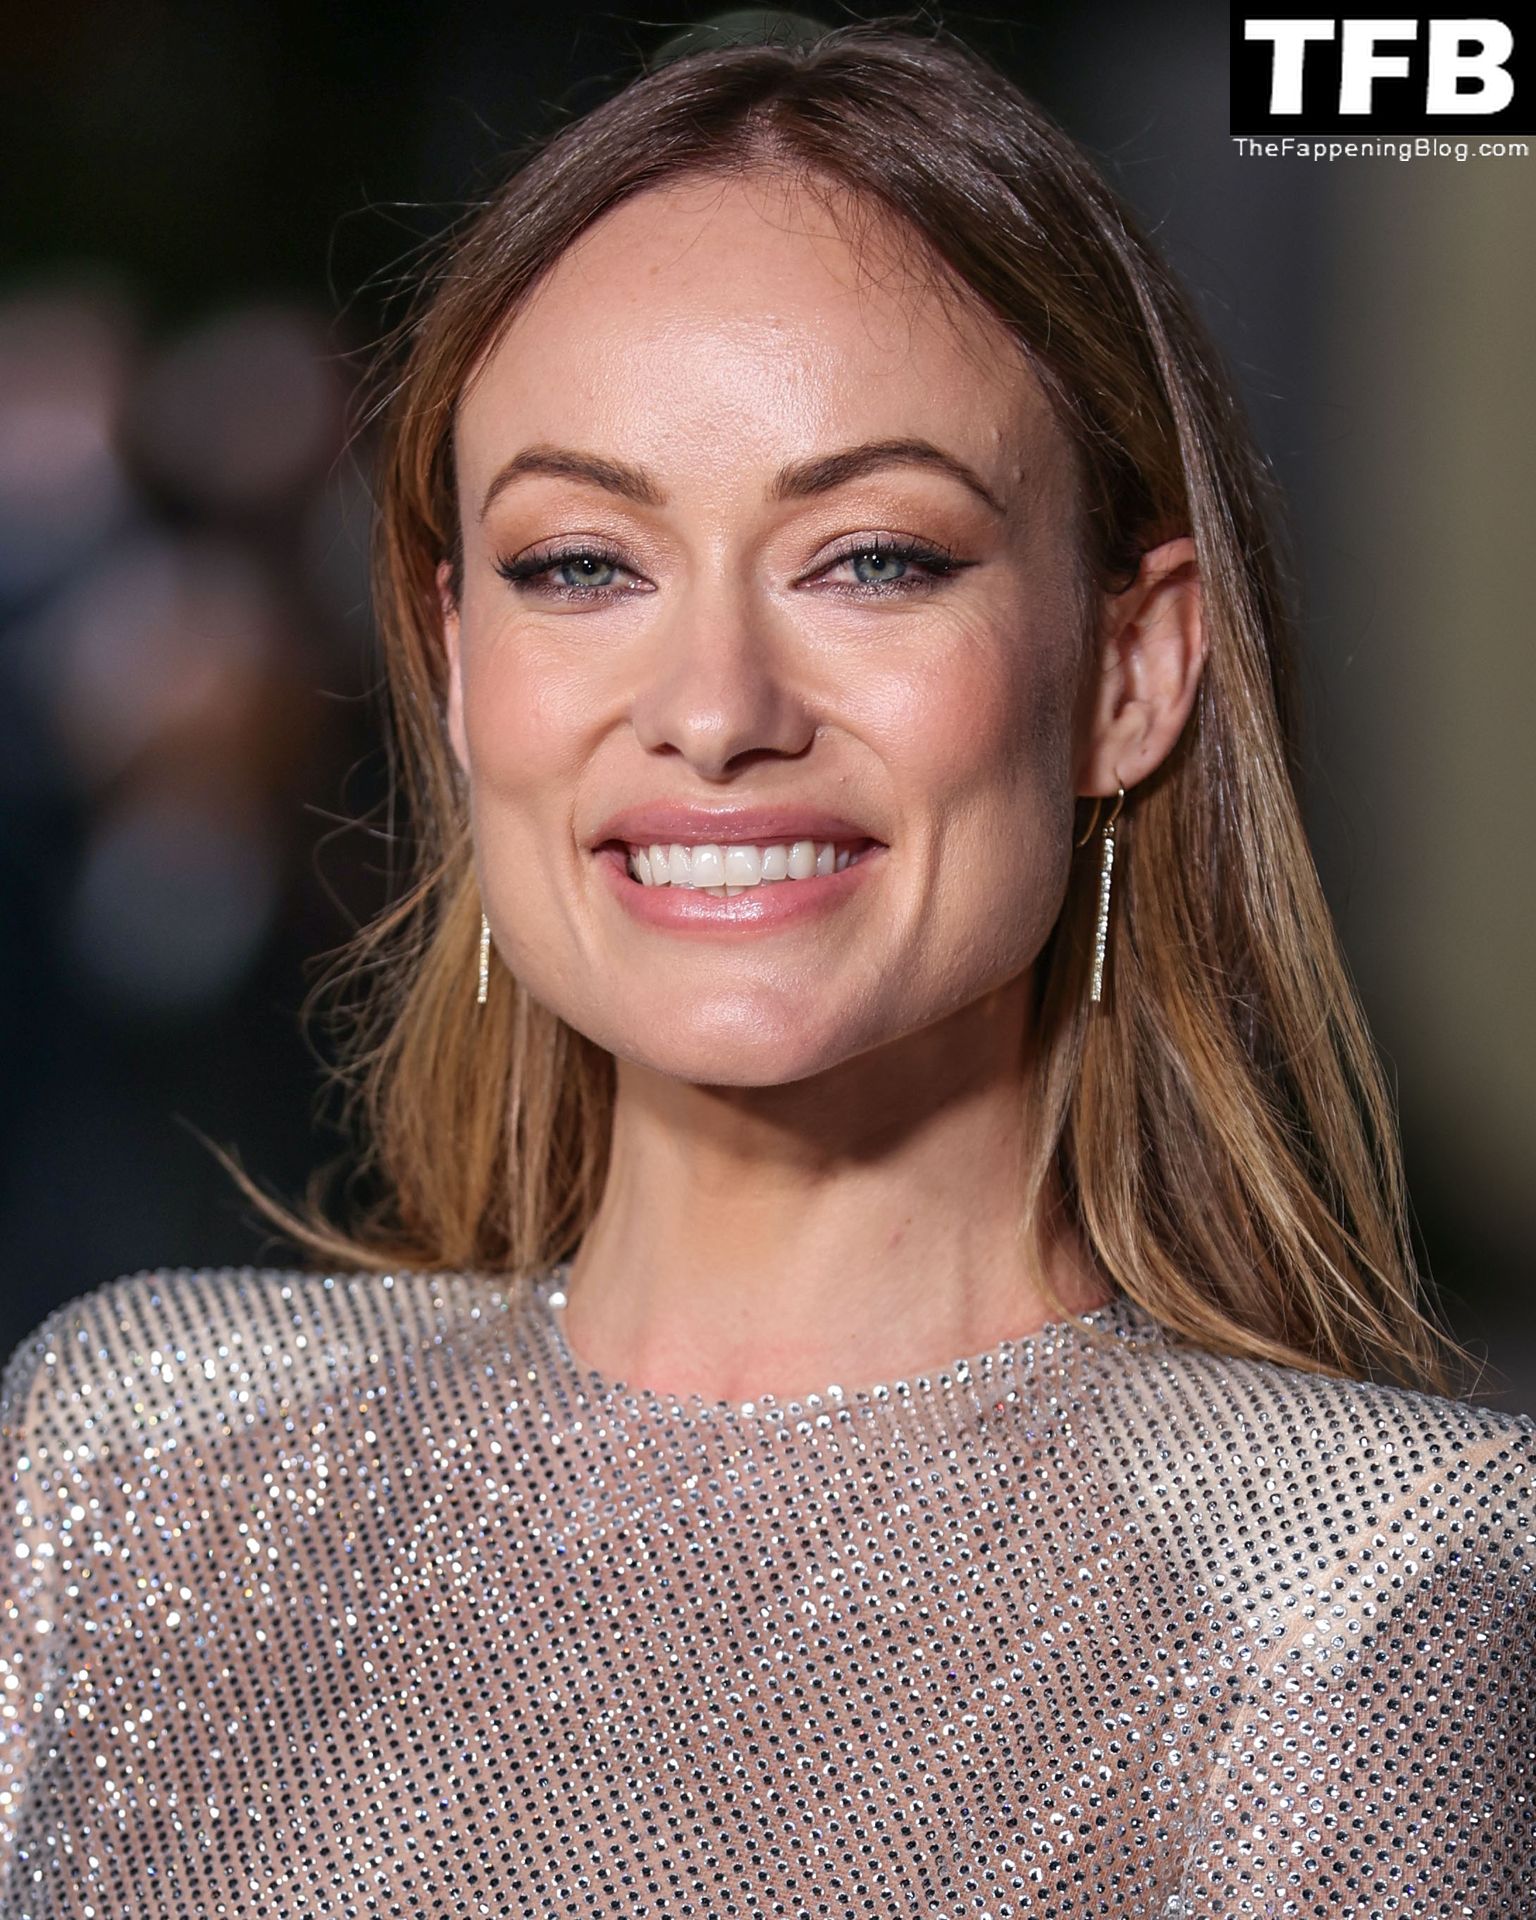 Olivia-Wilde-See-Through-The-Fappening-Blog-69.jpg